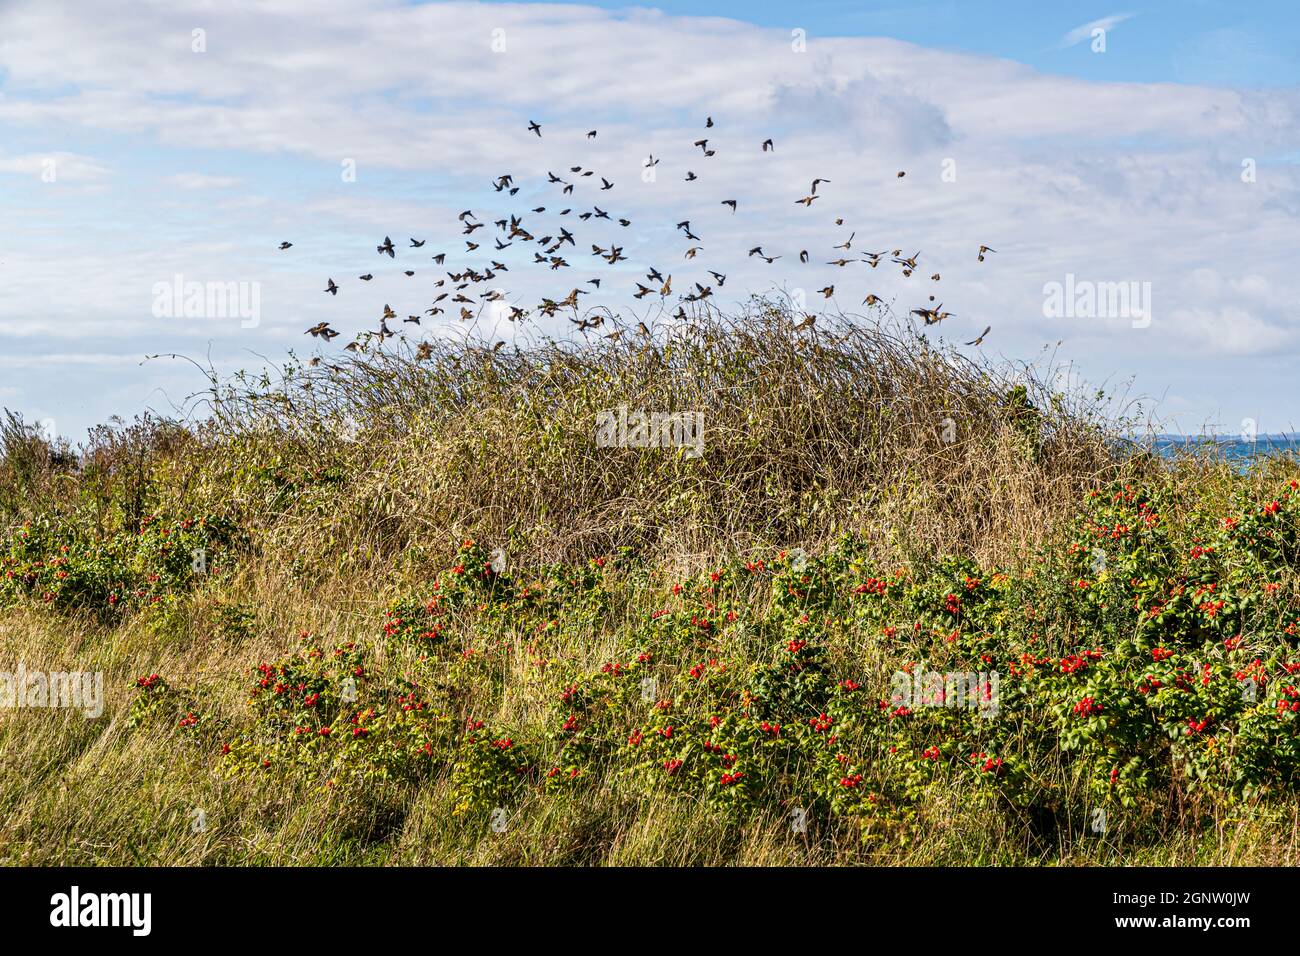 Formation flight on the coast of Langeland. Birds find plenty of food in autumn especially in the hedgerows full of berry fruits. Langeland, Denmark Stock Photo